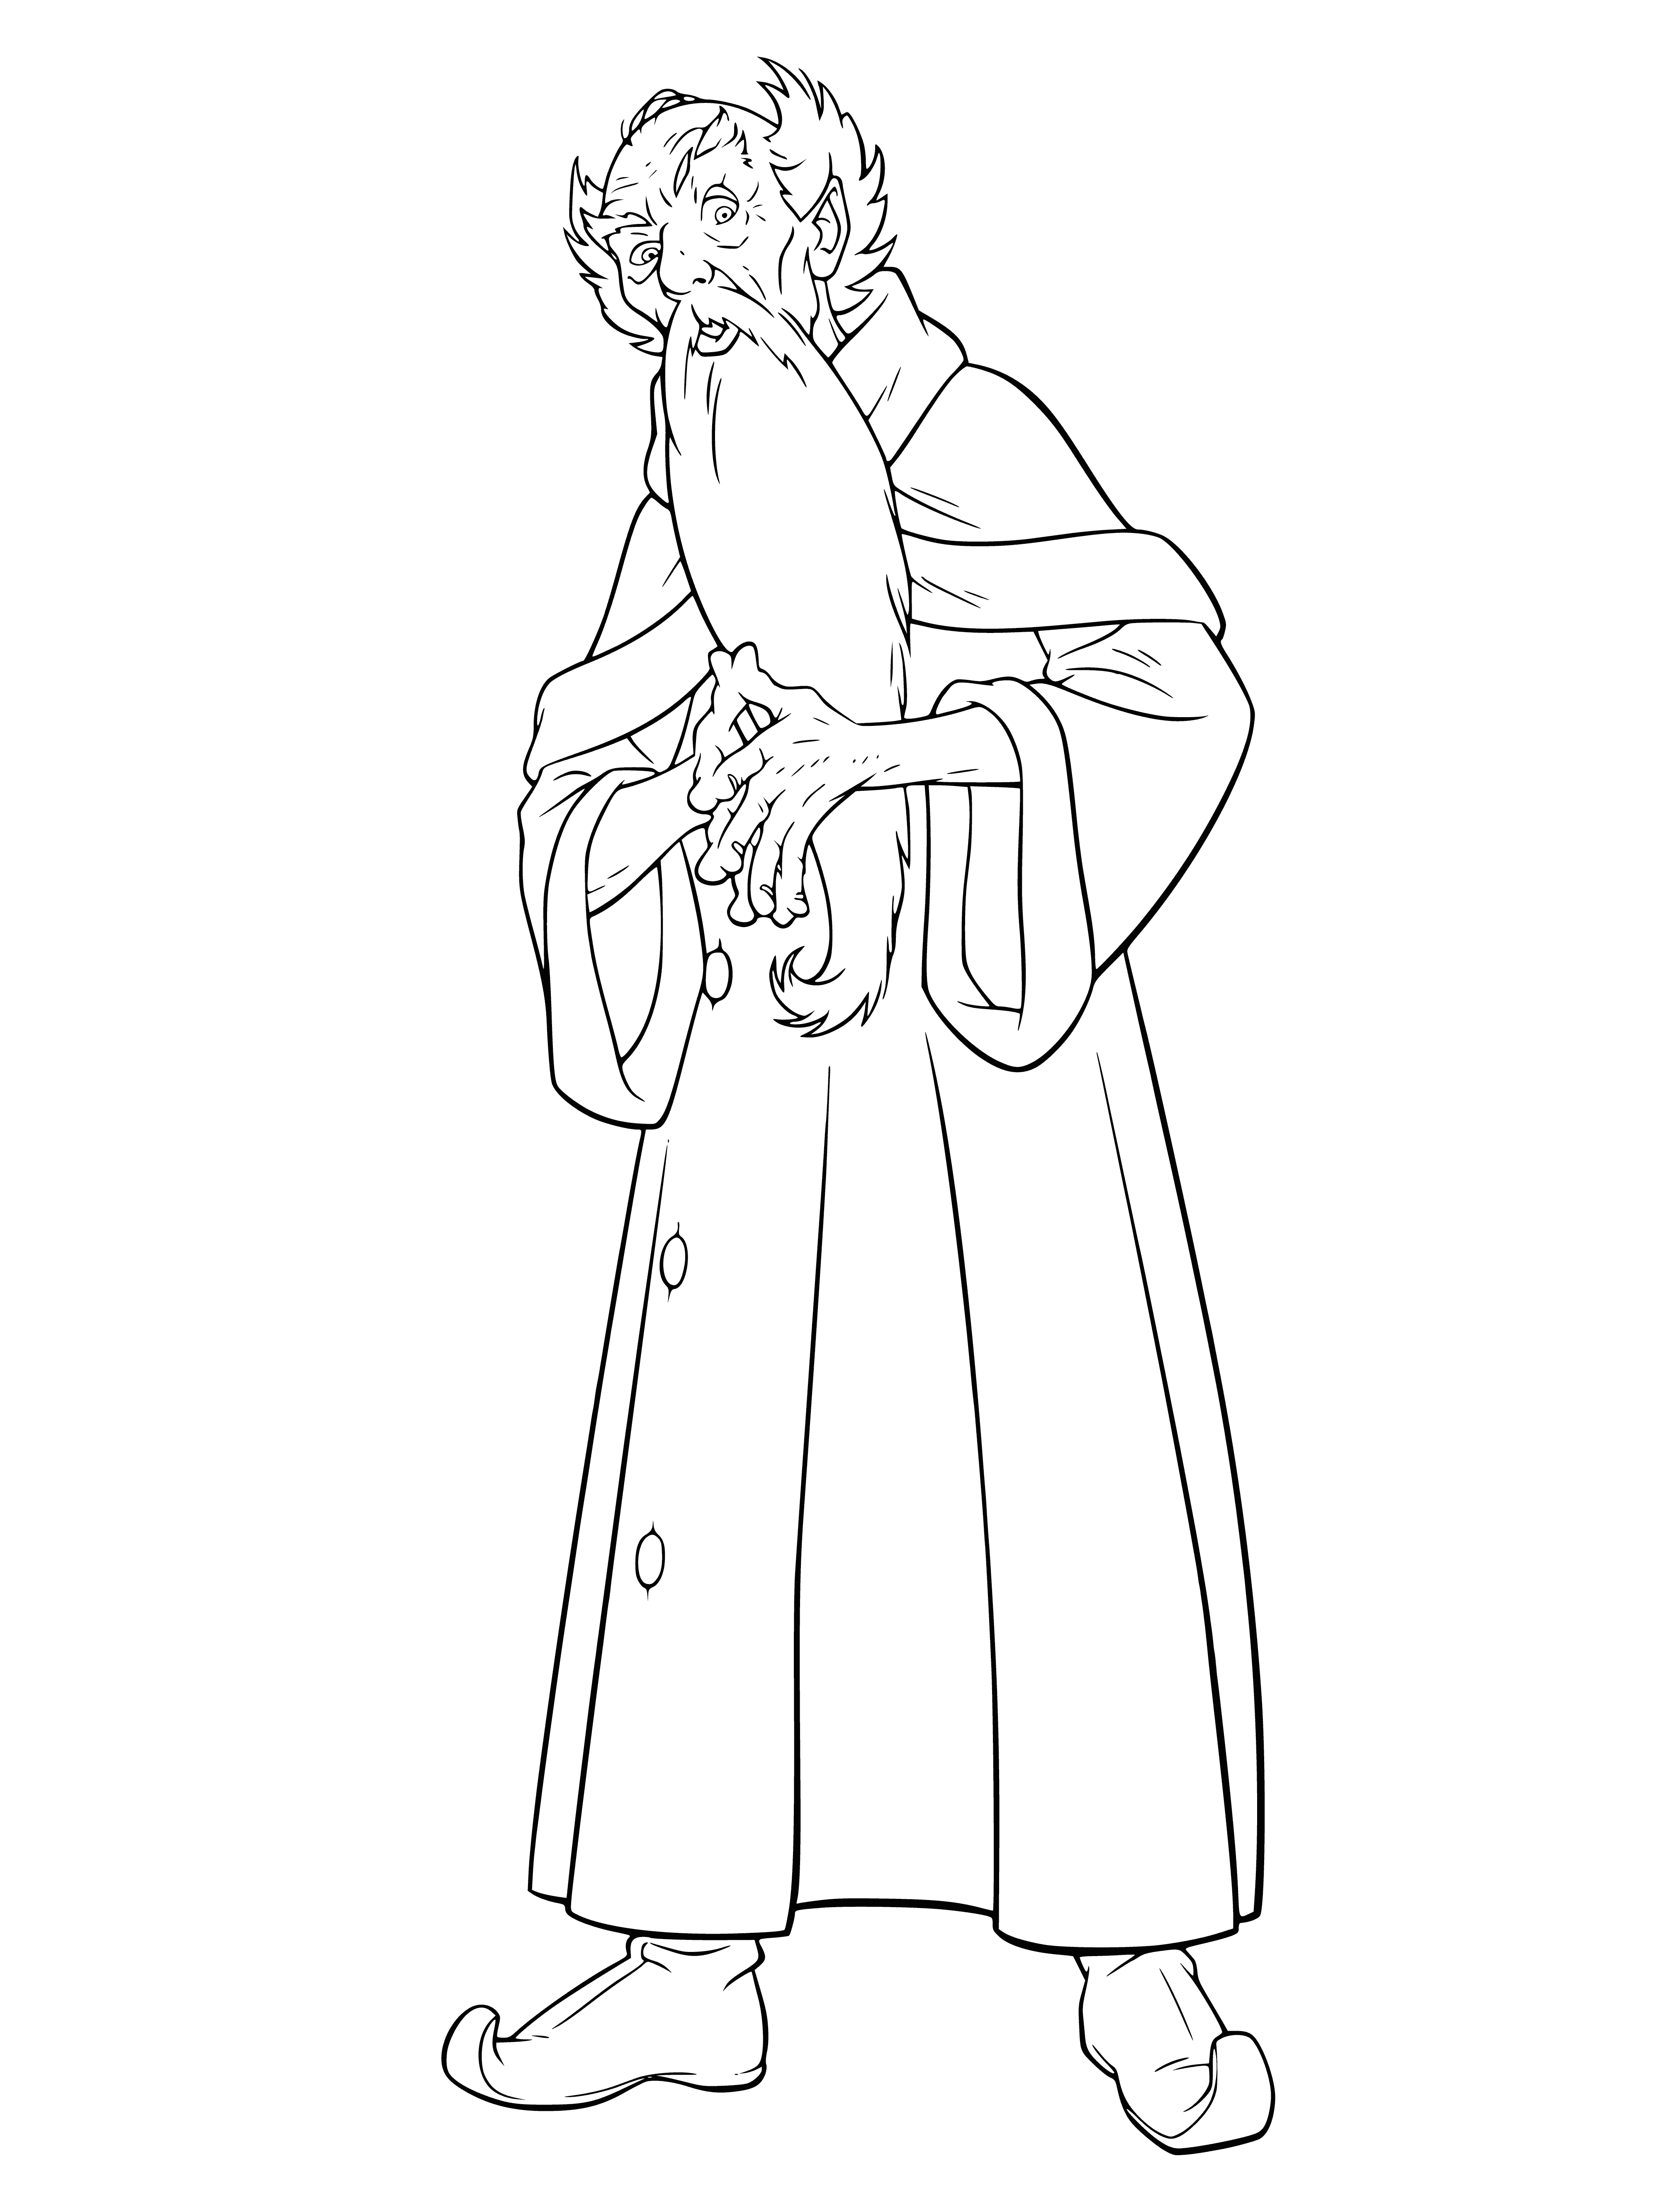 Ollivander, the wand dealer coloring page